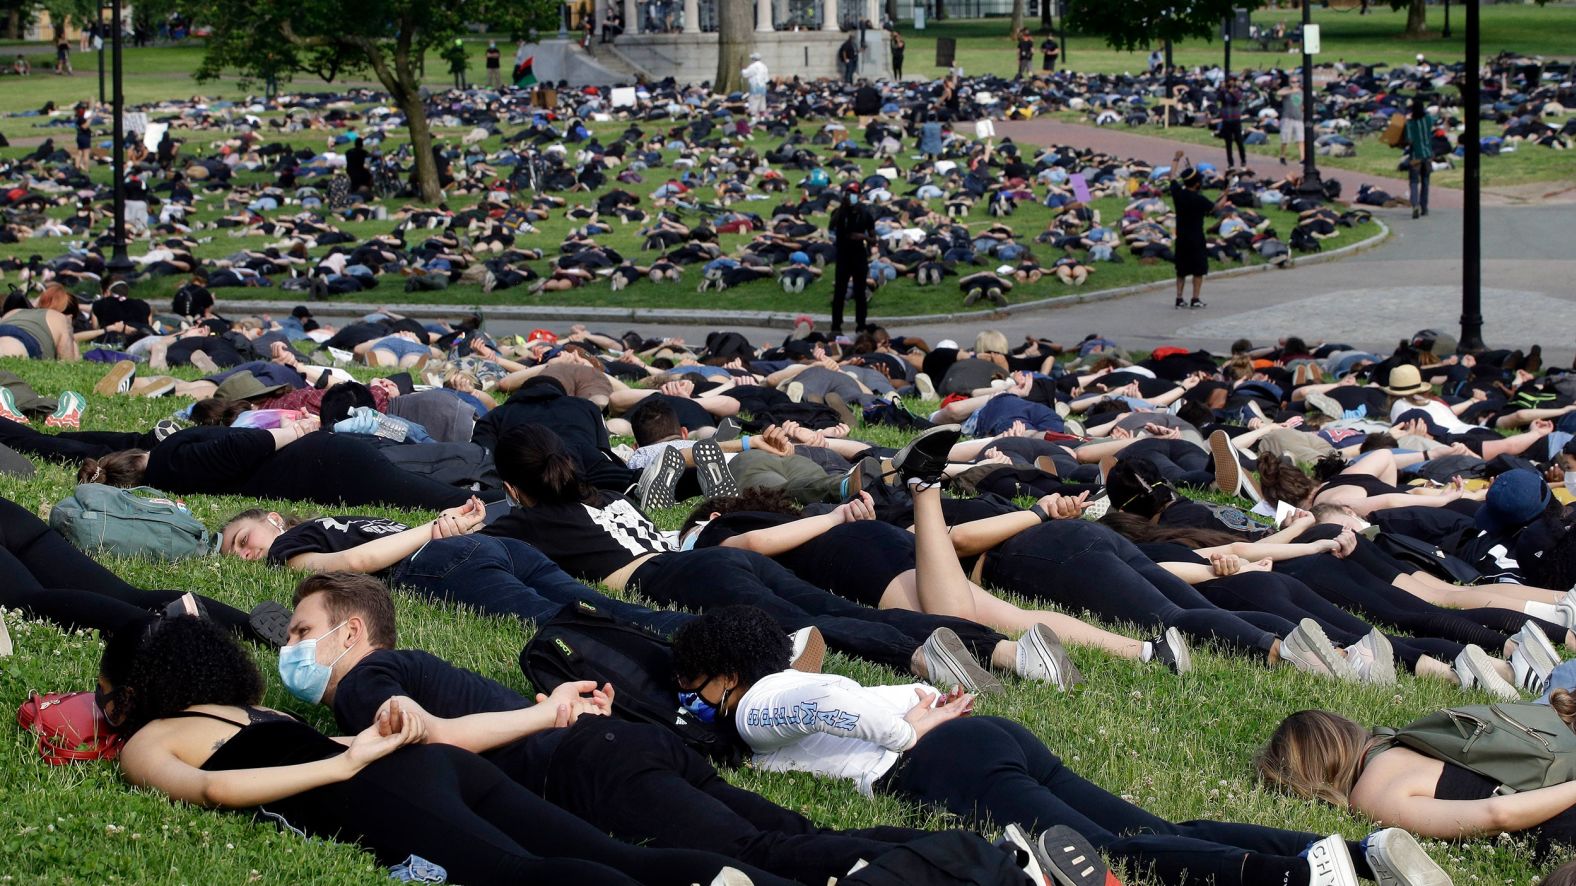 Hundreds of demonstrators in Boston lie face down, symbolizing the last moments of George Floyd's life, on June 3. <a href="index.php?page=&url=https%3A%2F%2Fwww.cnn.com%2F2020%2F06%2F03%2Fworld%2Fgallery%2Fgeorge-floyd-lie-down-intl-scli%2Findex.html" target="_blank">Related photos: Lie-in protests around the world</a>